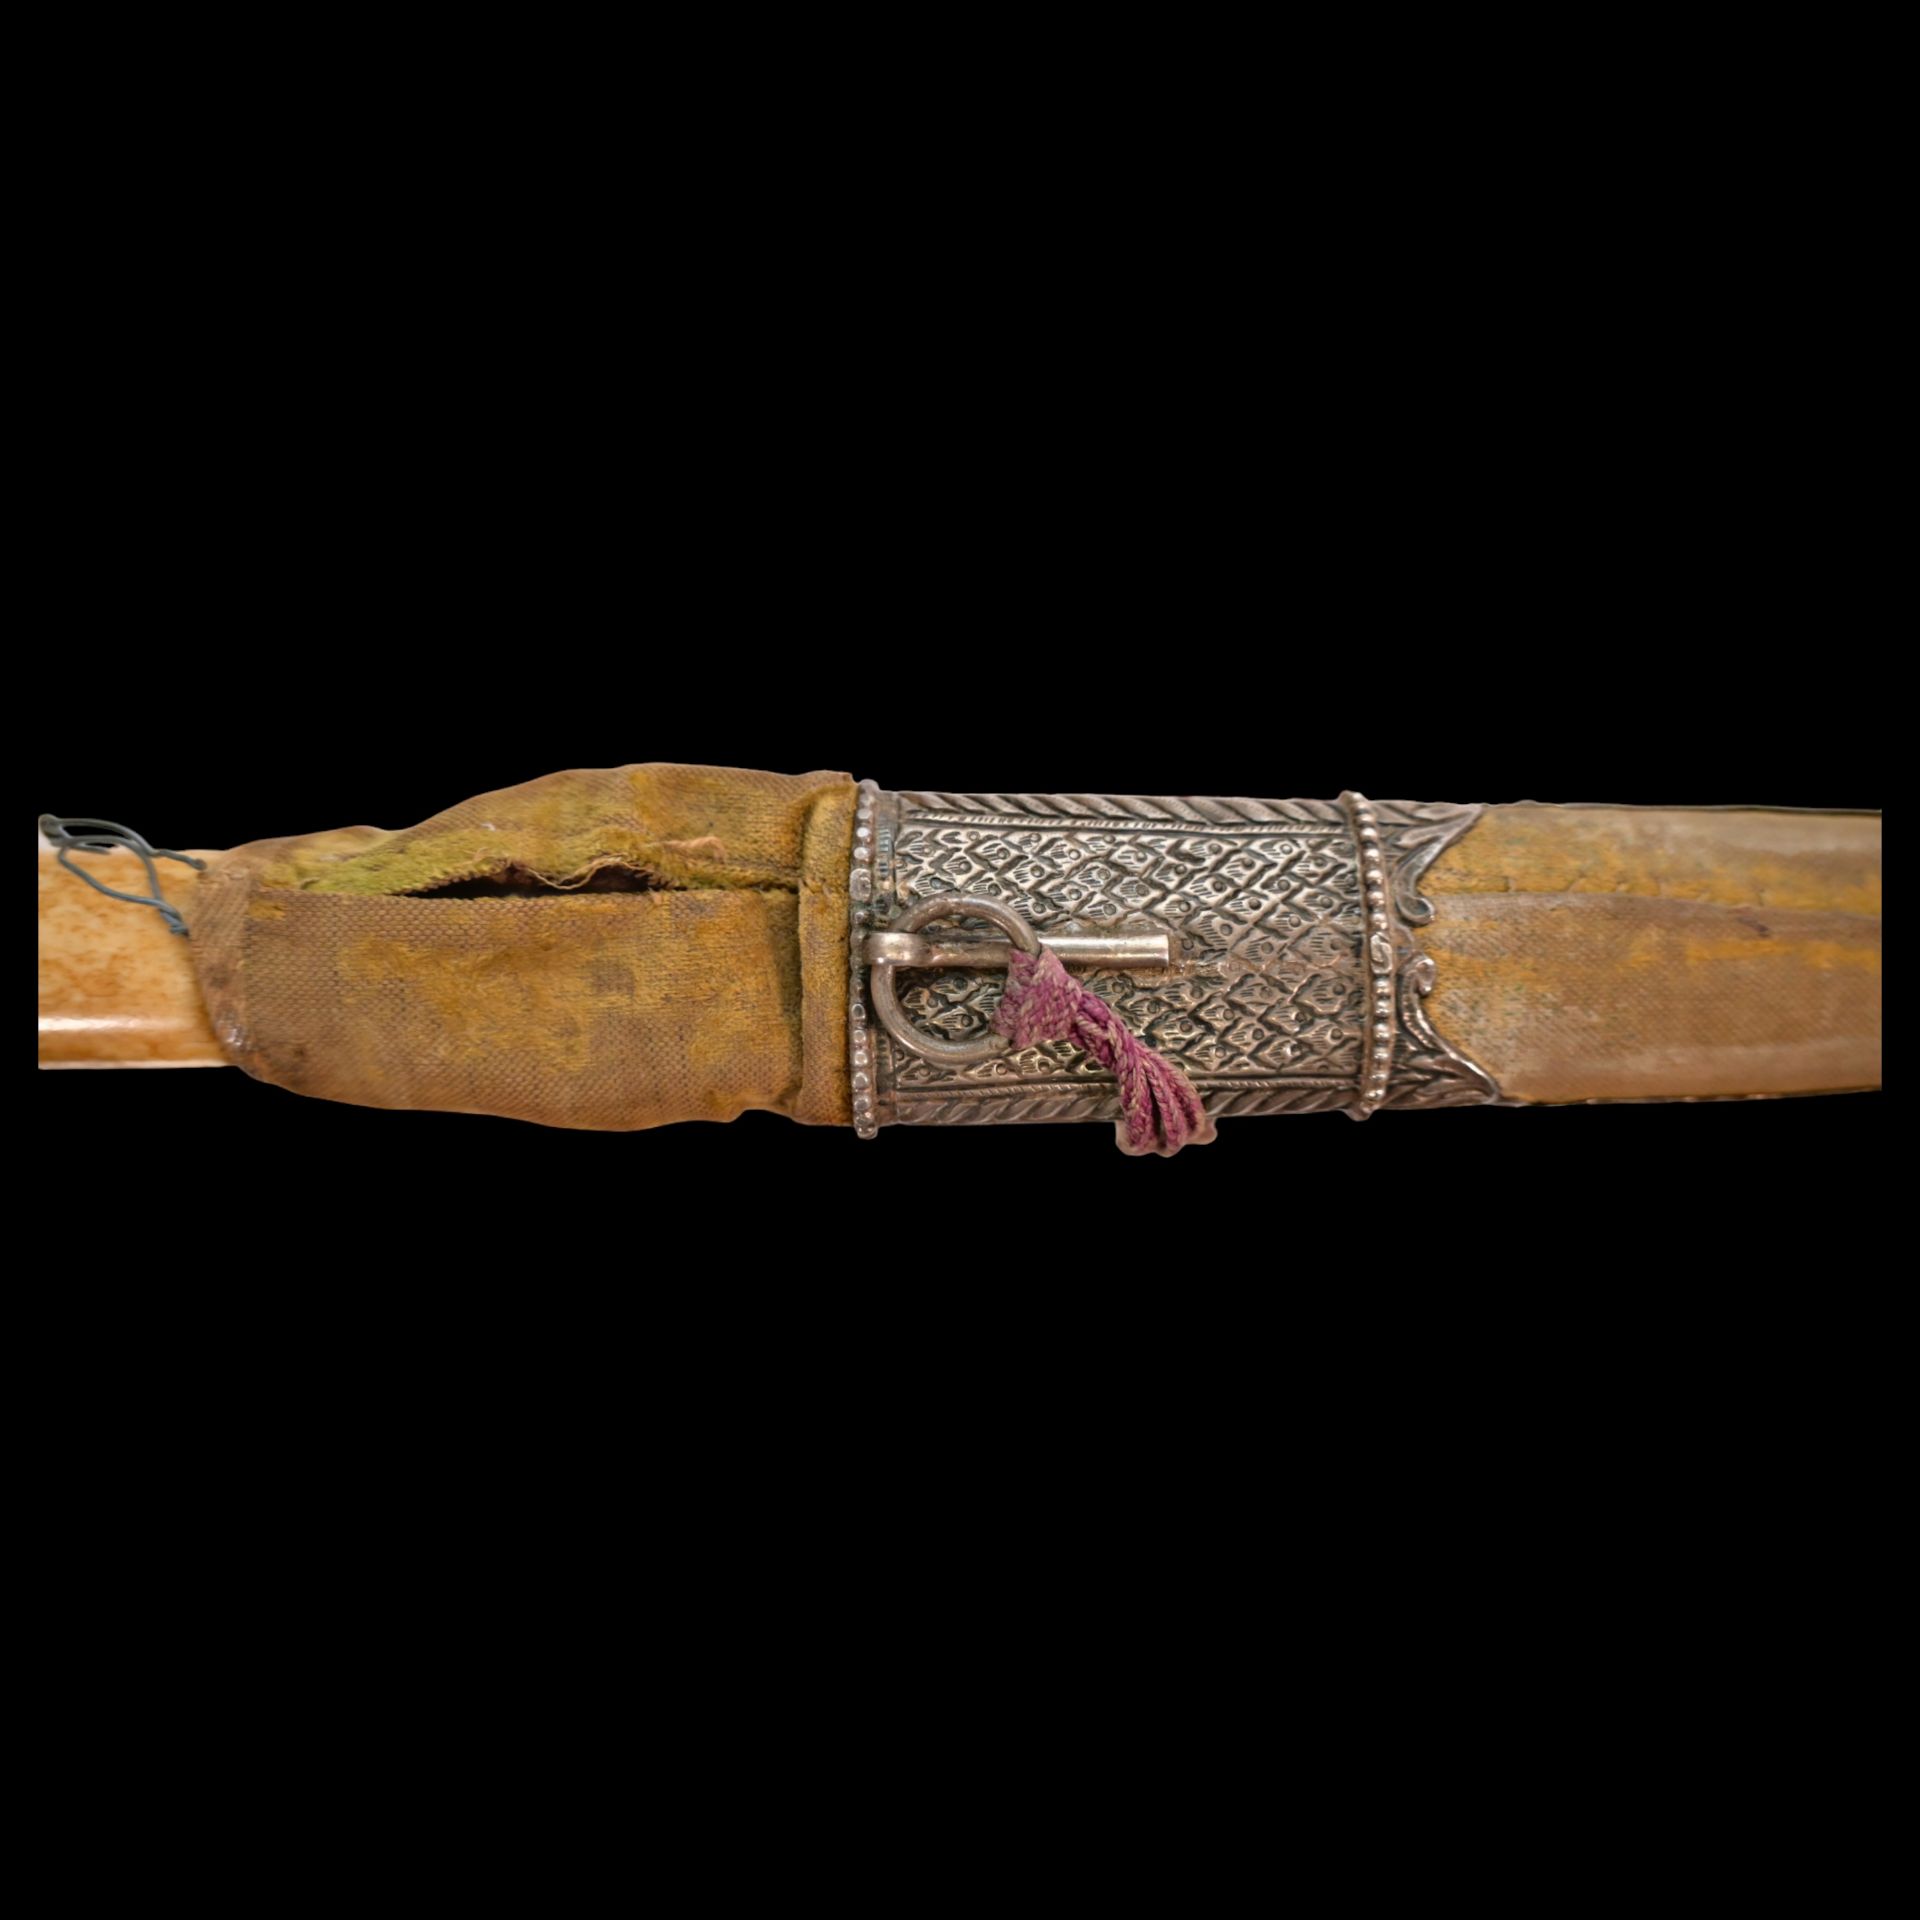 A PERSIAN ZAND DYNASTY KARD DAGGER WITH WOOTZ BLADE AND GOLD INLAY. - Image 19 of 27